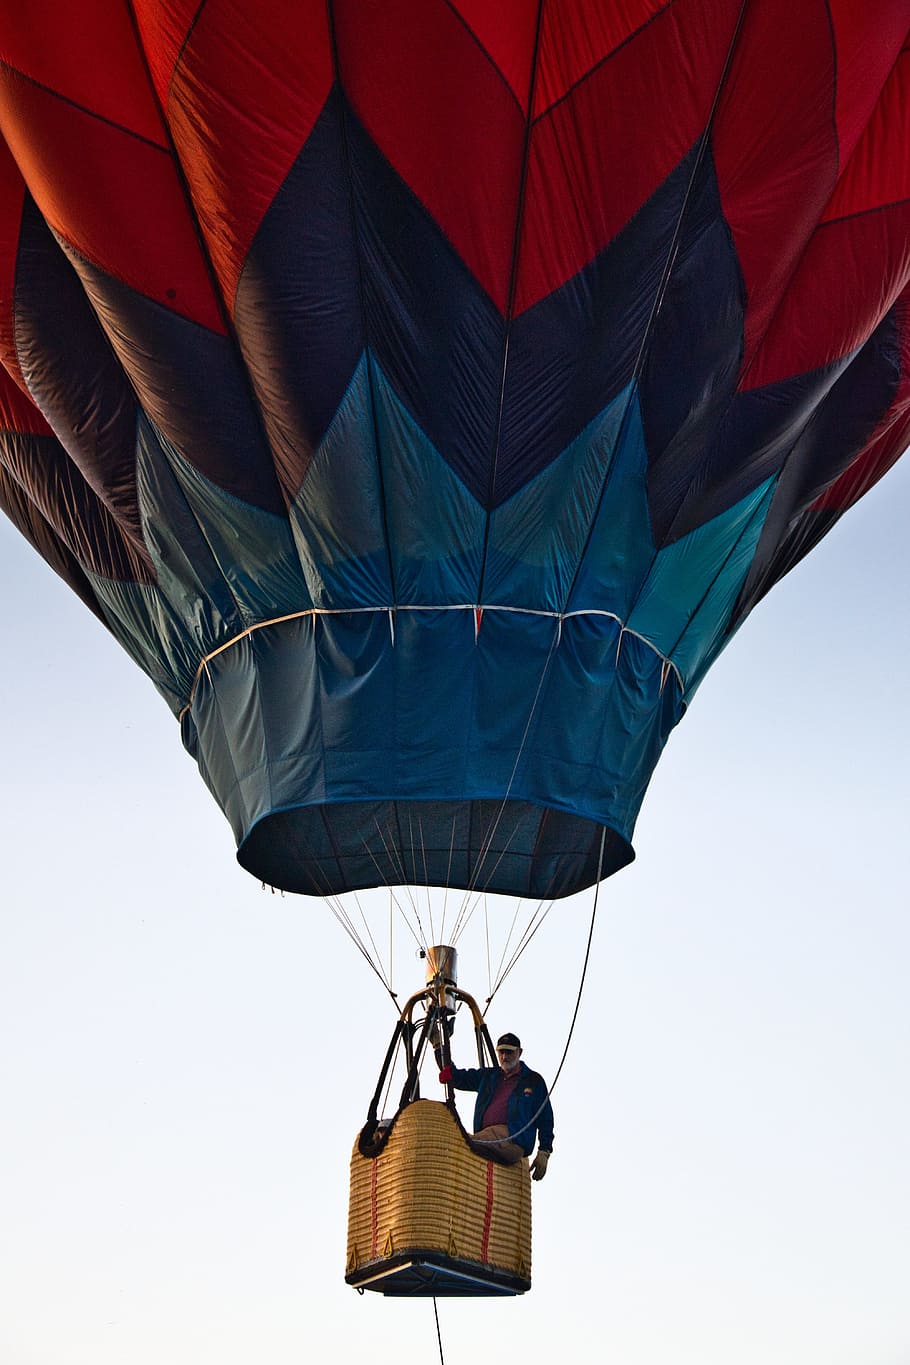 Man Riding Blue and Red Hot Air Balloon during Day, aircraft